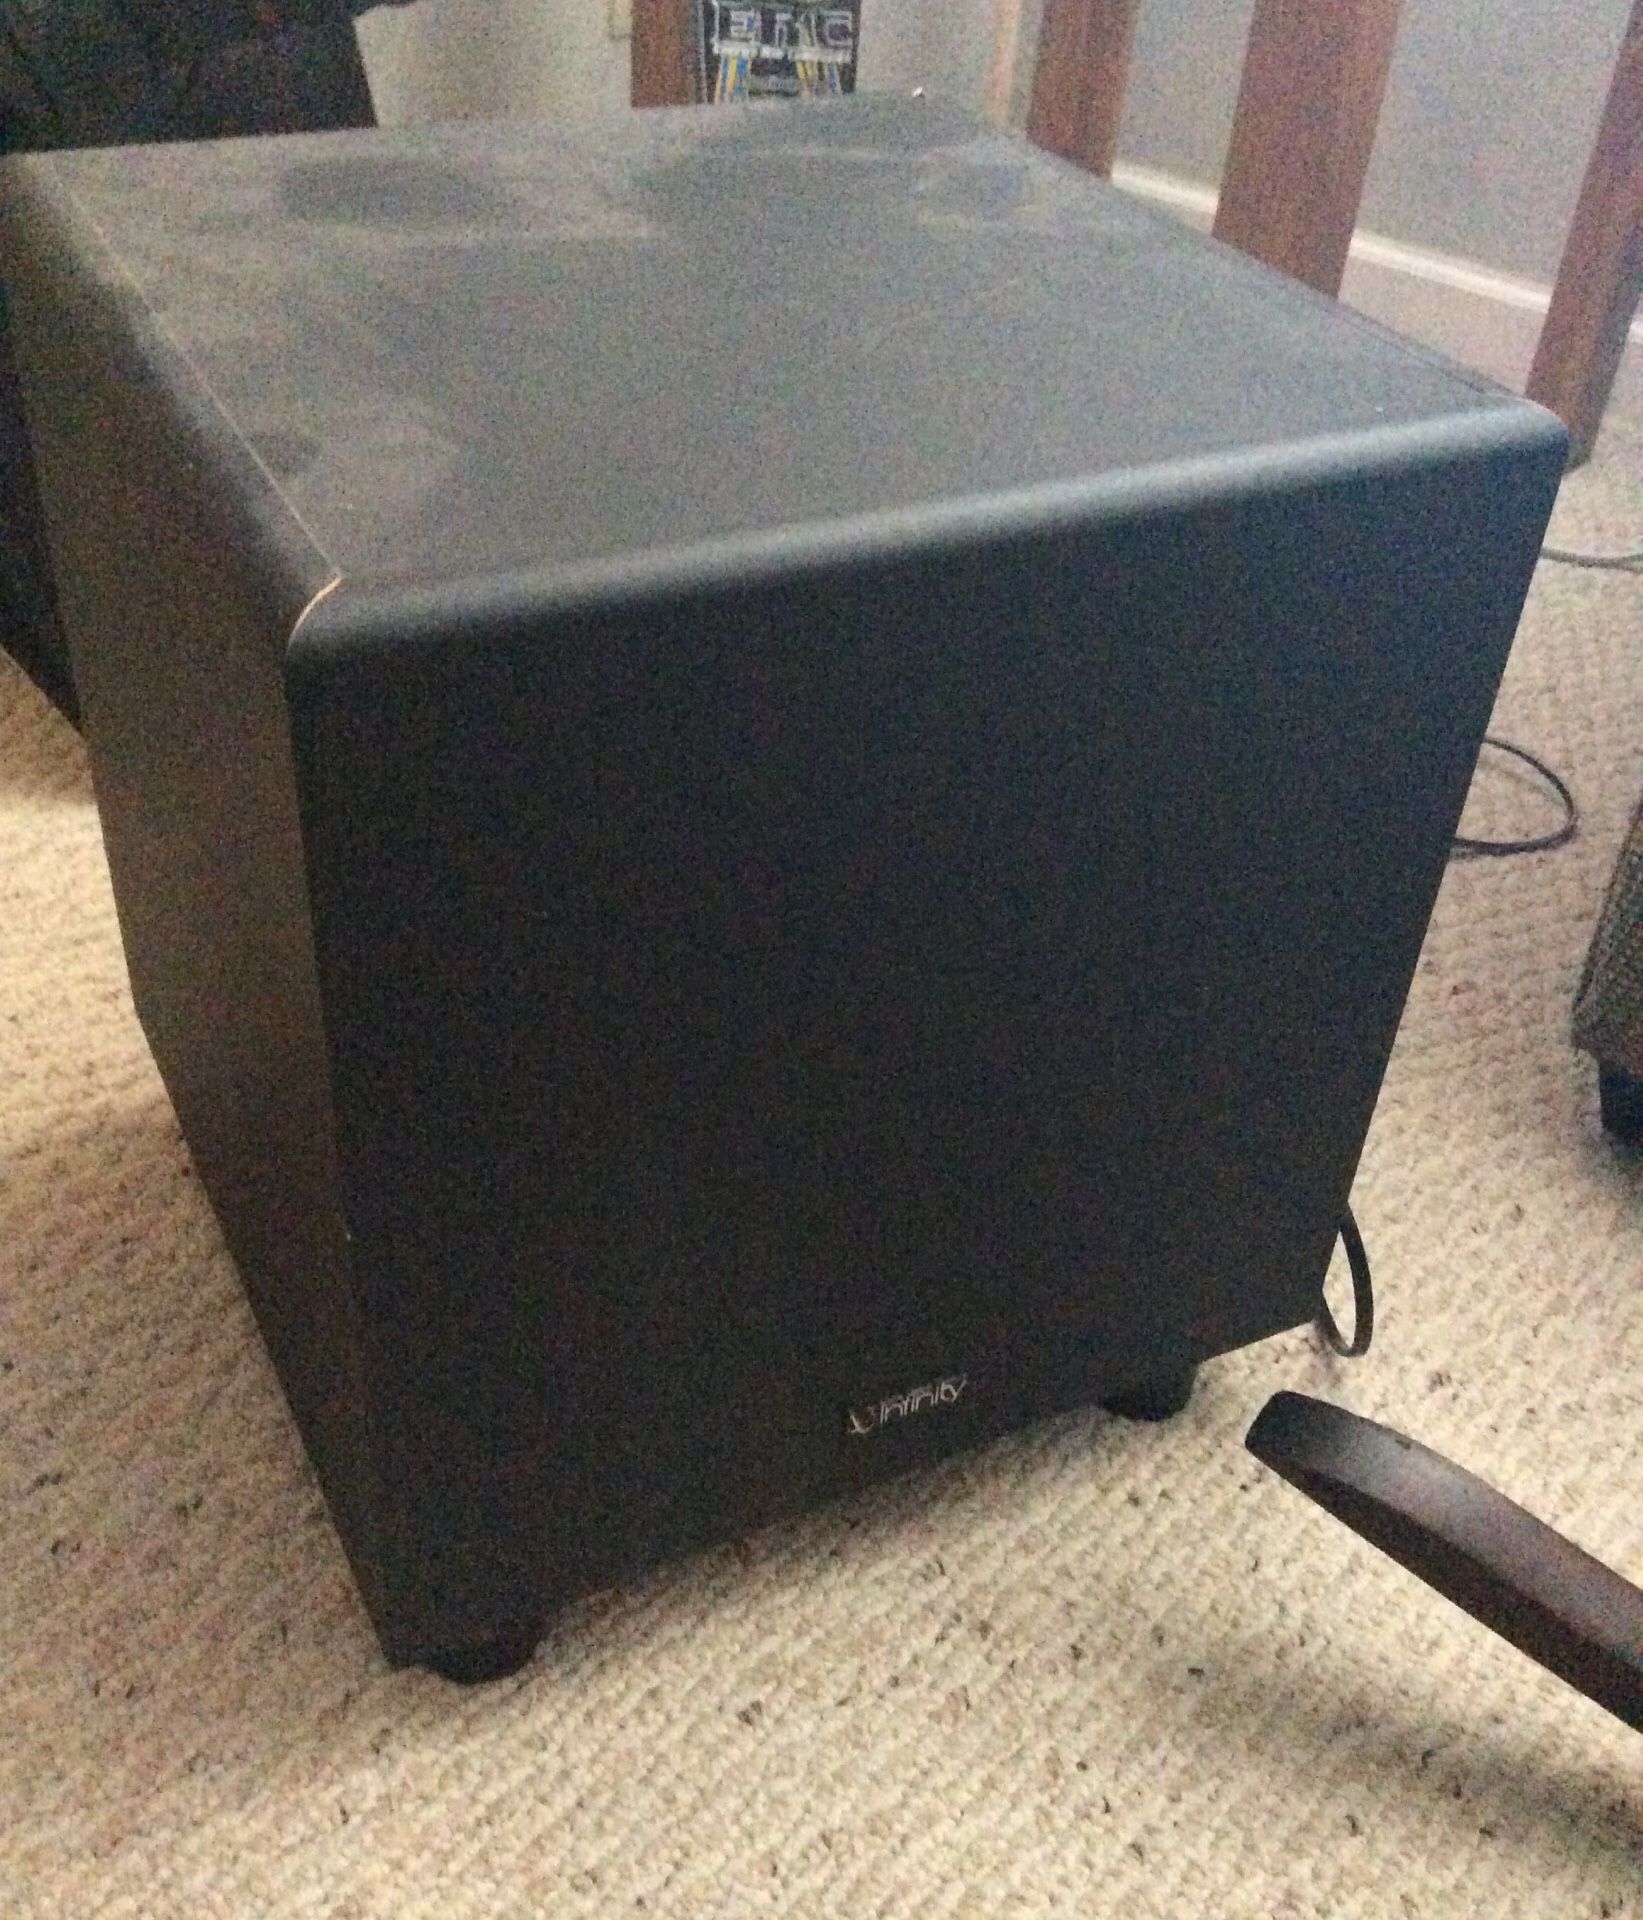 Infinity U1 20 powered sub with speakers and wires.I will include the Yamaha amp.